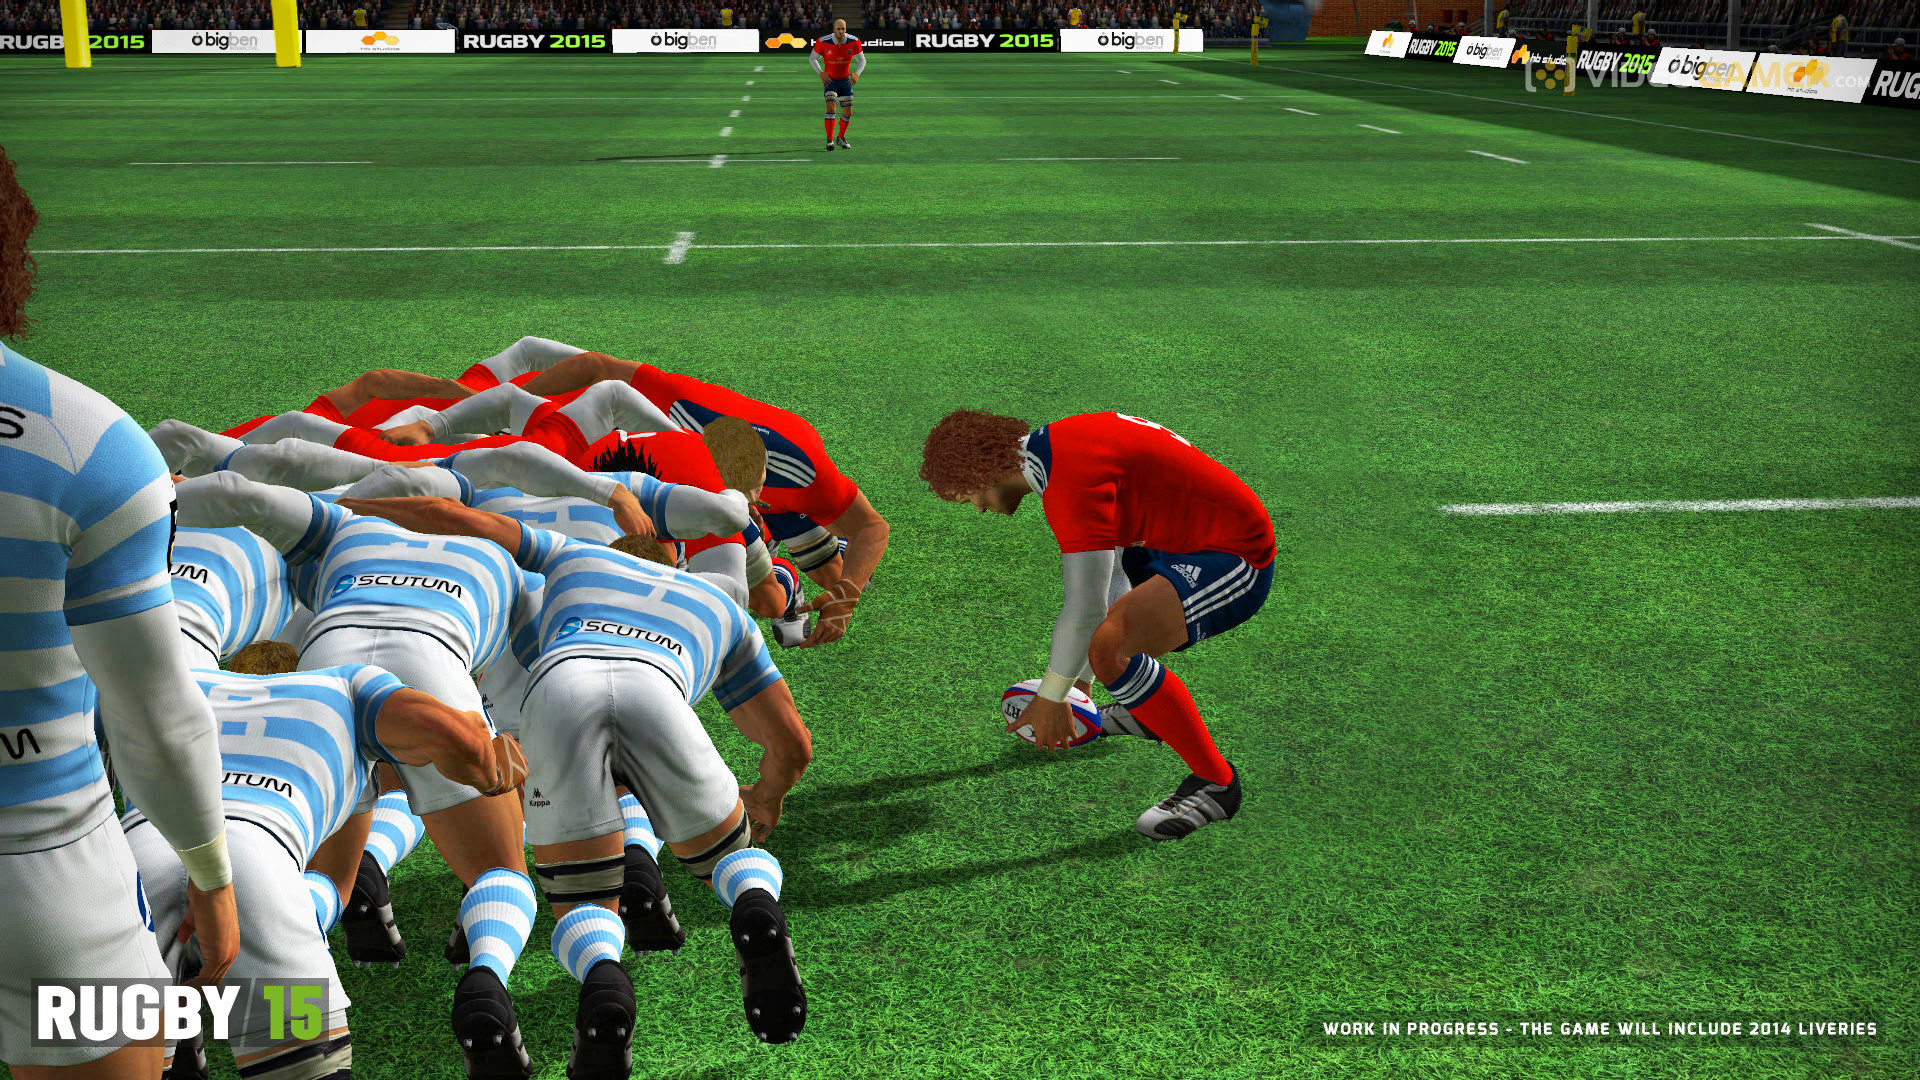 free rugby games download